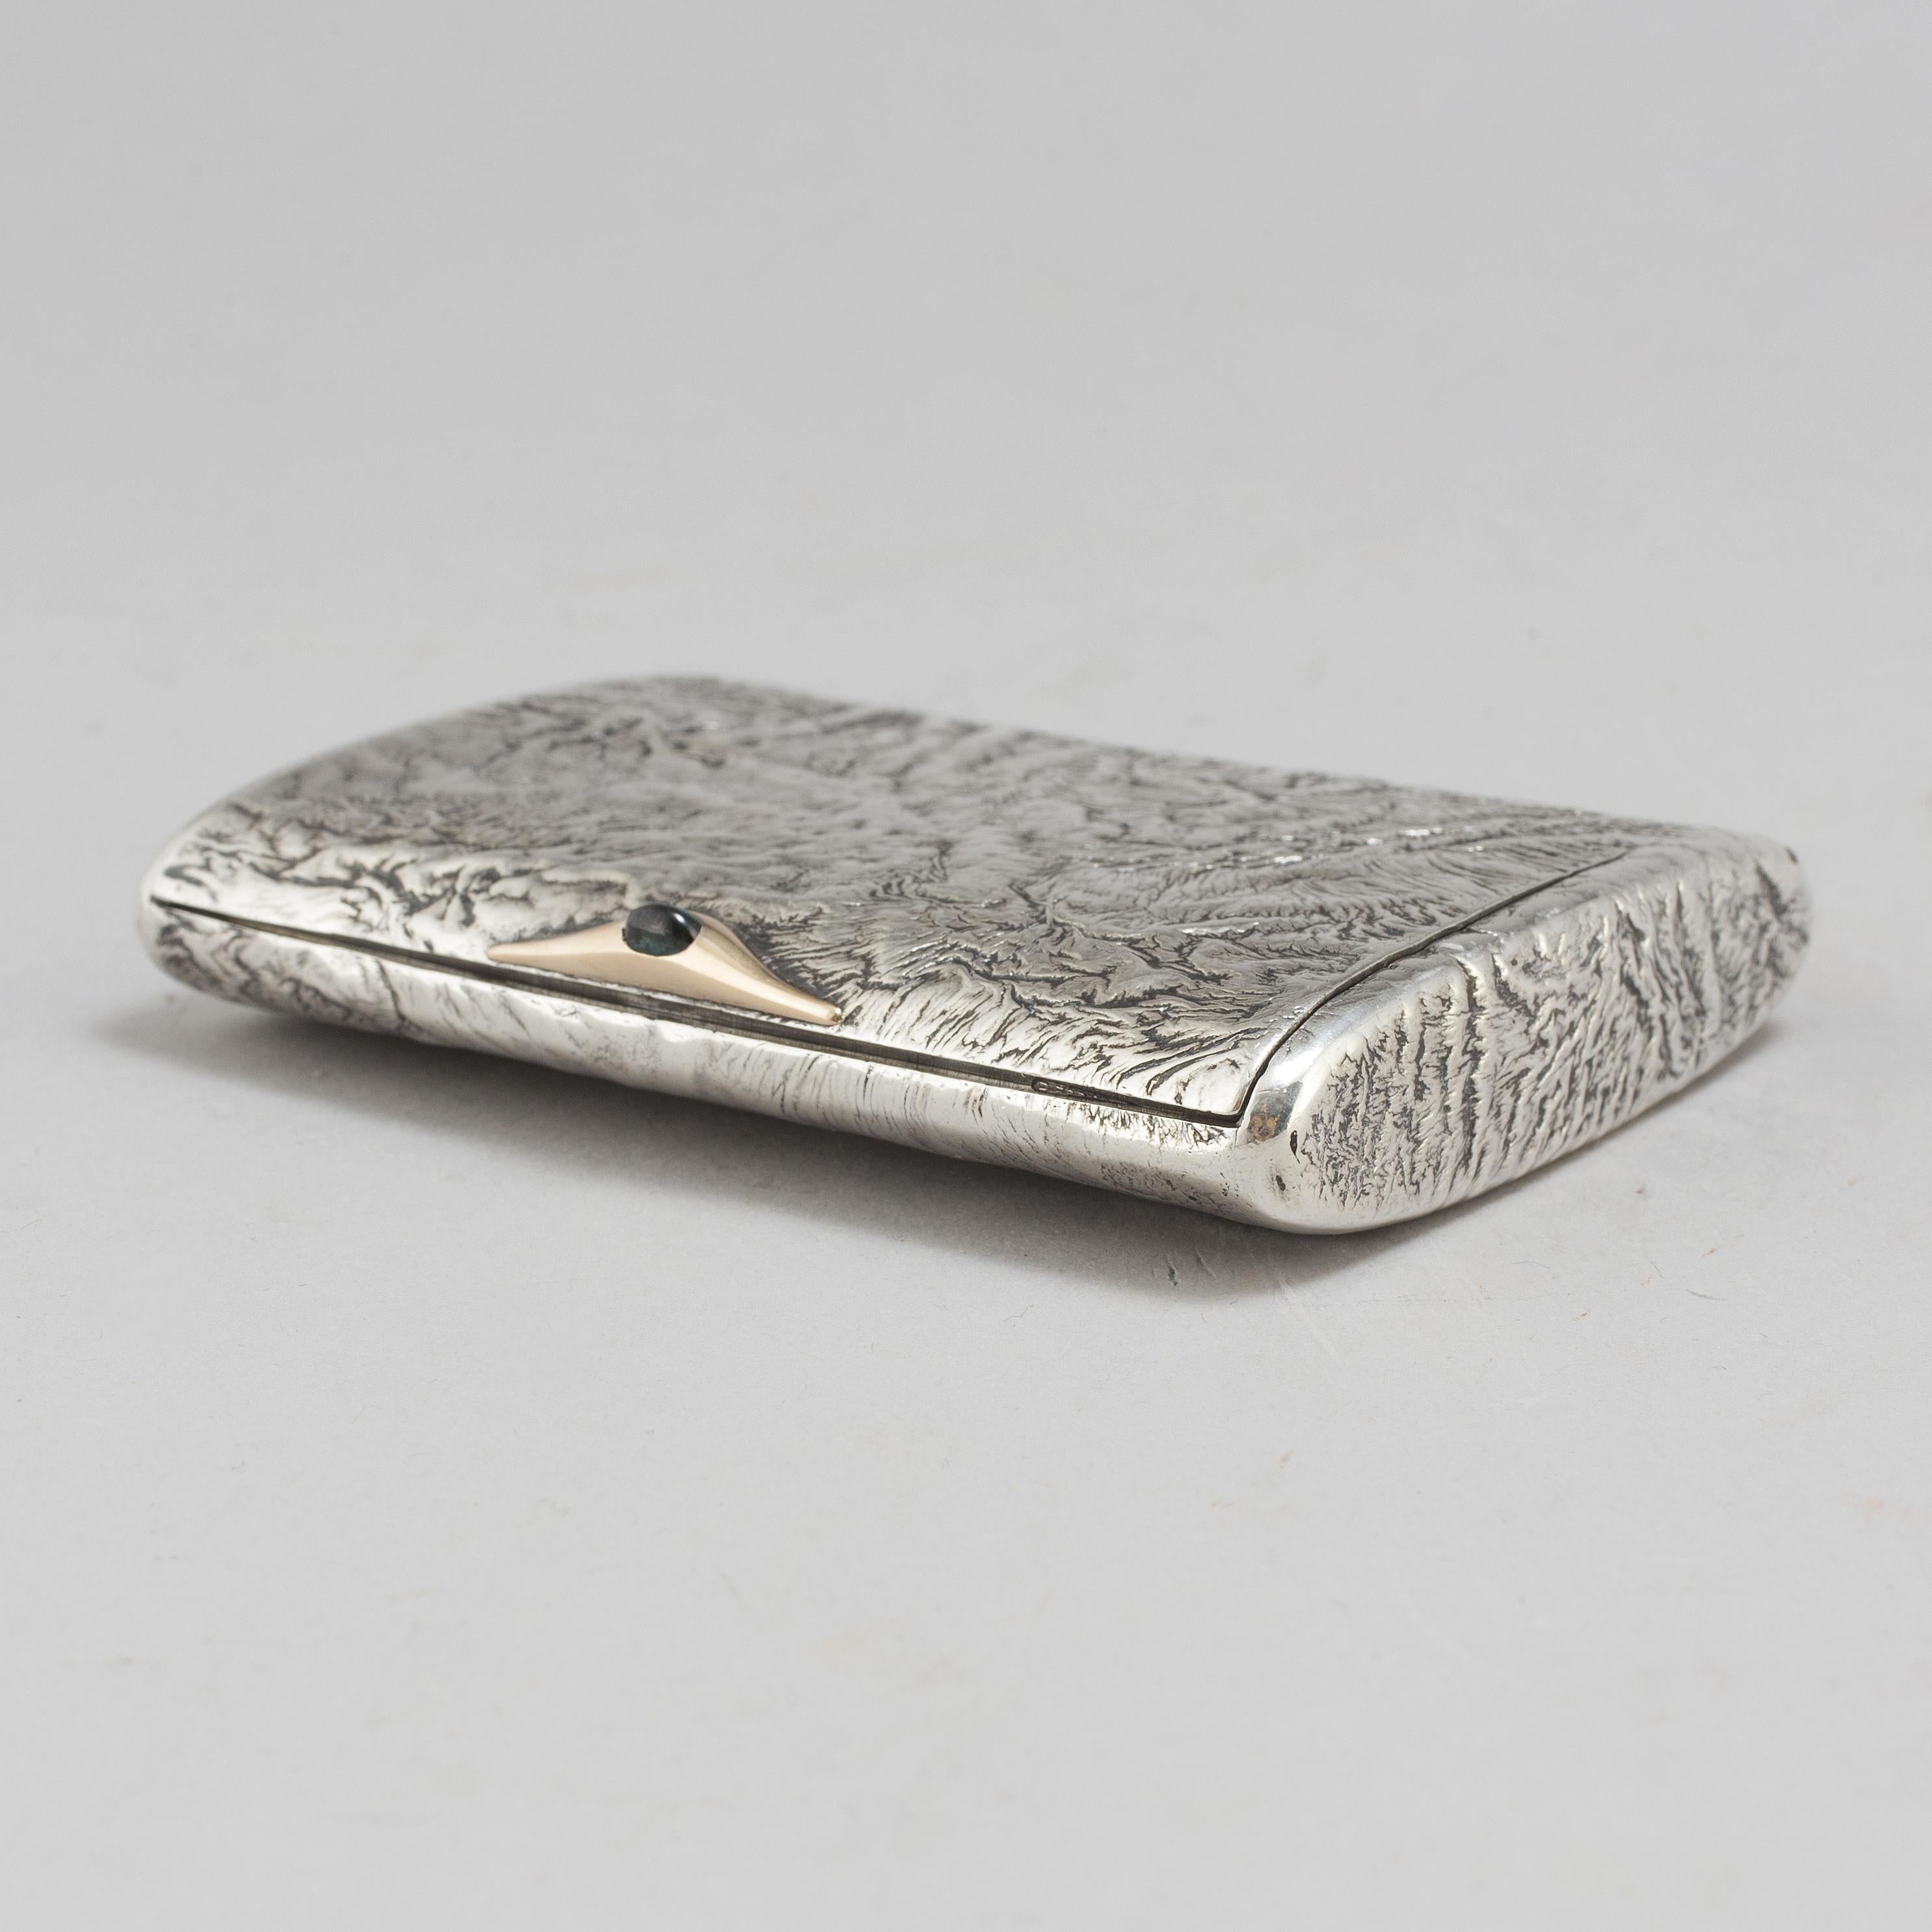 A parcel gilt samorodok  silver cigarette case by Vladimir Gordon S.t Petersburg,  with green stone, c.1900
Embossed signature.. A Fine quality Russian silver cigarette case. Reticulation  Samodorok was a technique used by many pre-revolution era